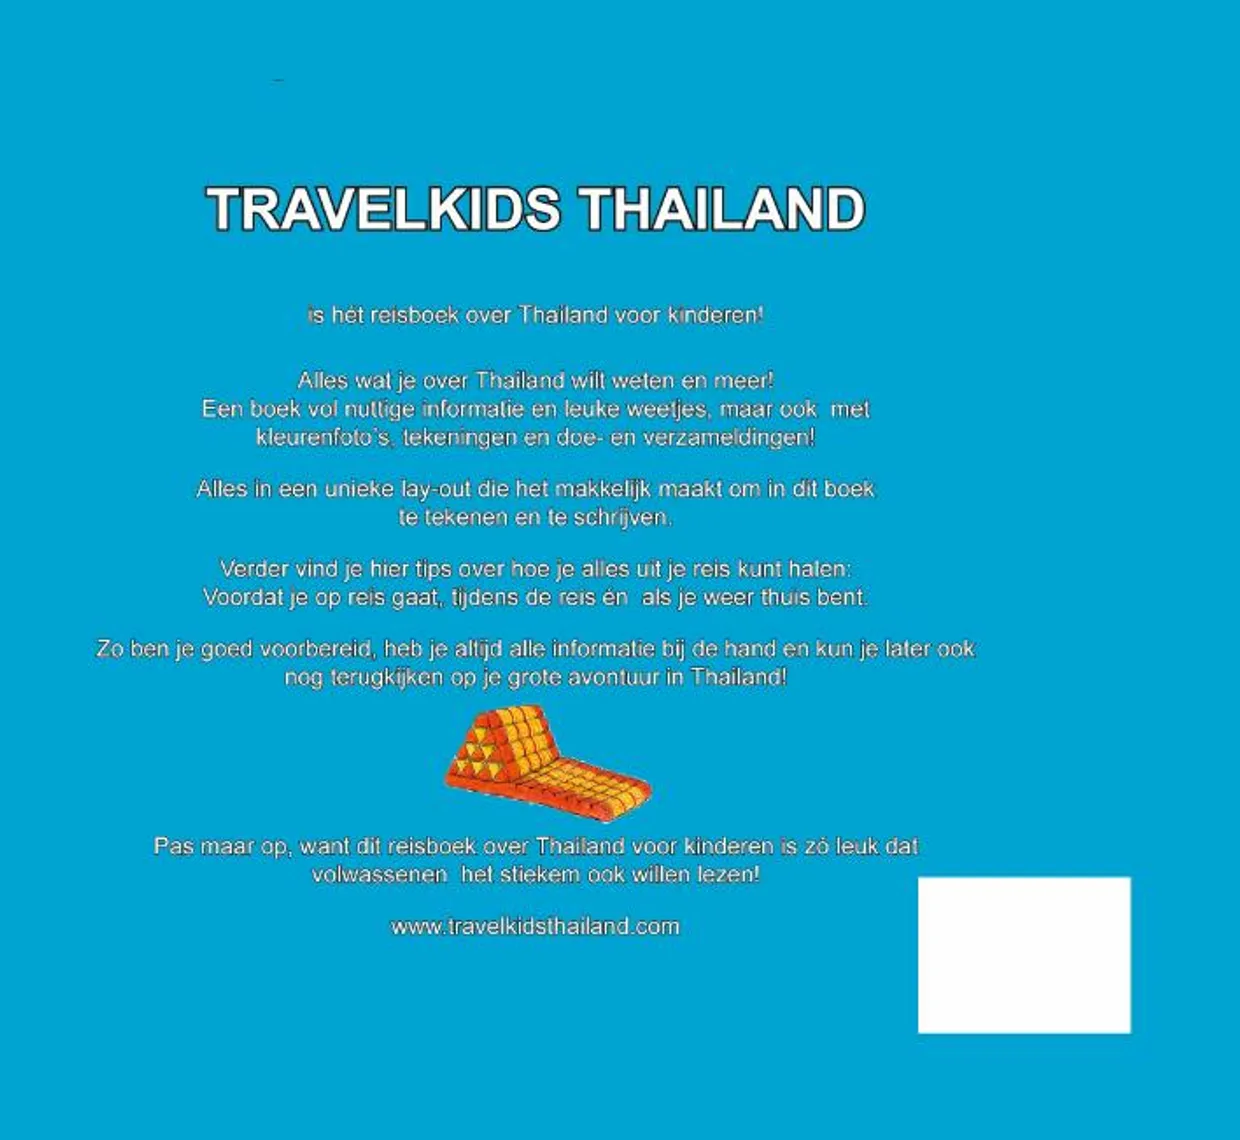 TravelKids Asia